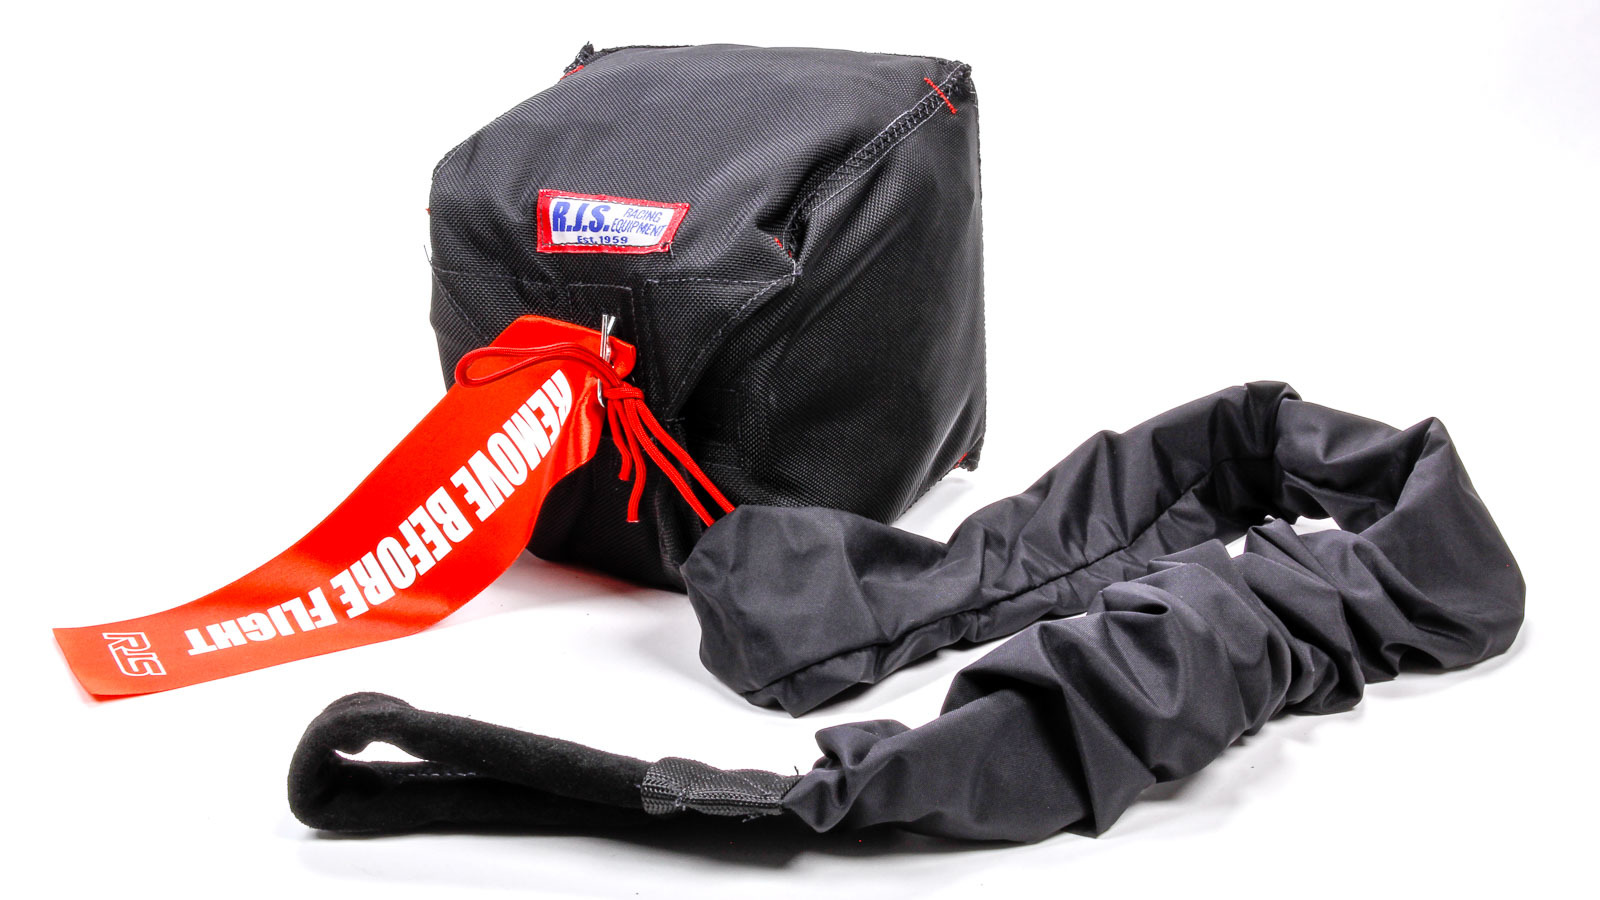 RJS Safety 7000204 - Qualifier Chute W/ Nylon Bag and Pilot Red